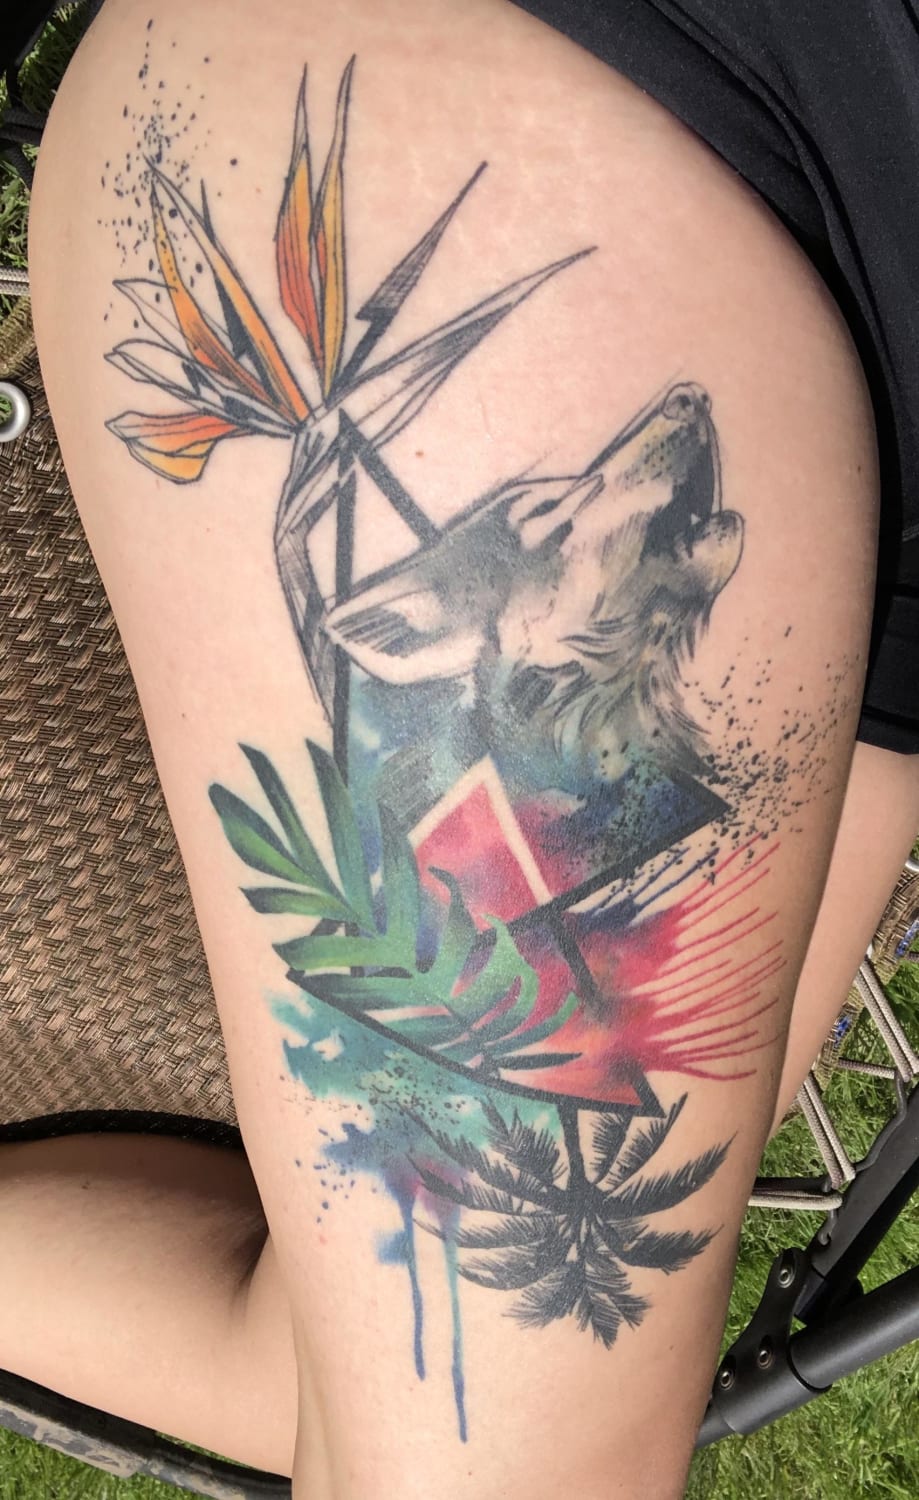 Now 8 months healed and itching to add more...done by the incredible Jules Boho at a guest spot at Chronic Ink, Toronto